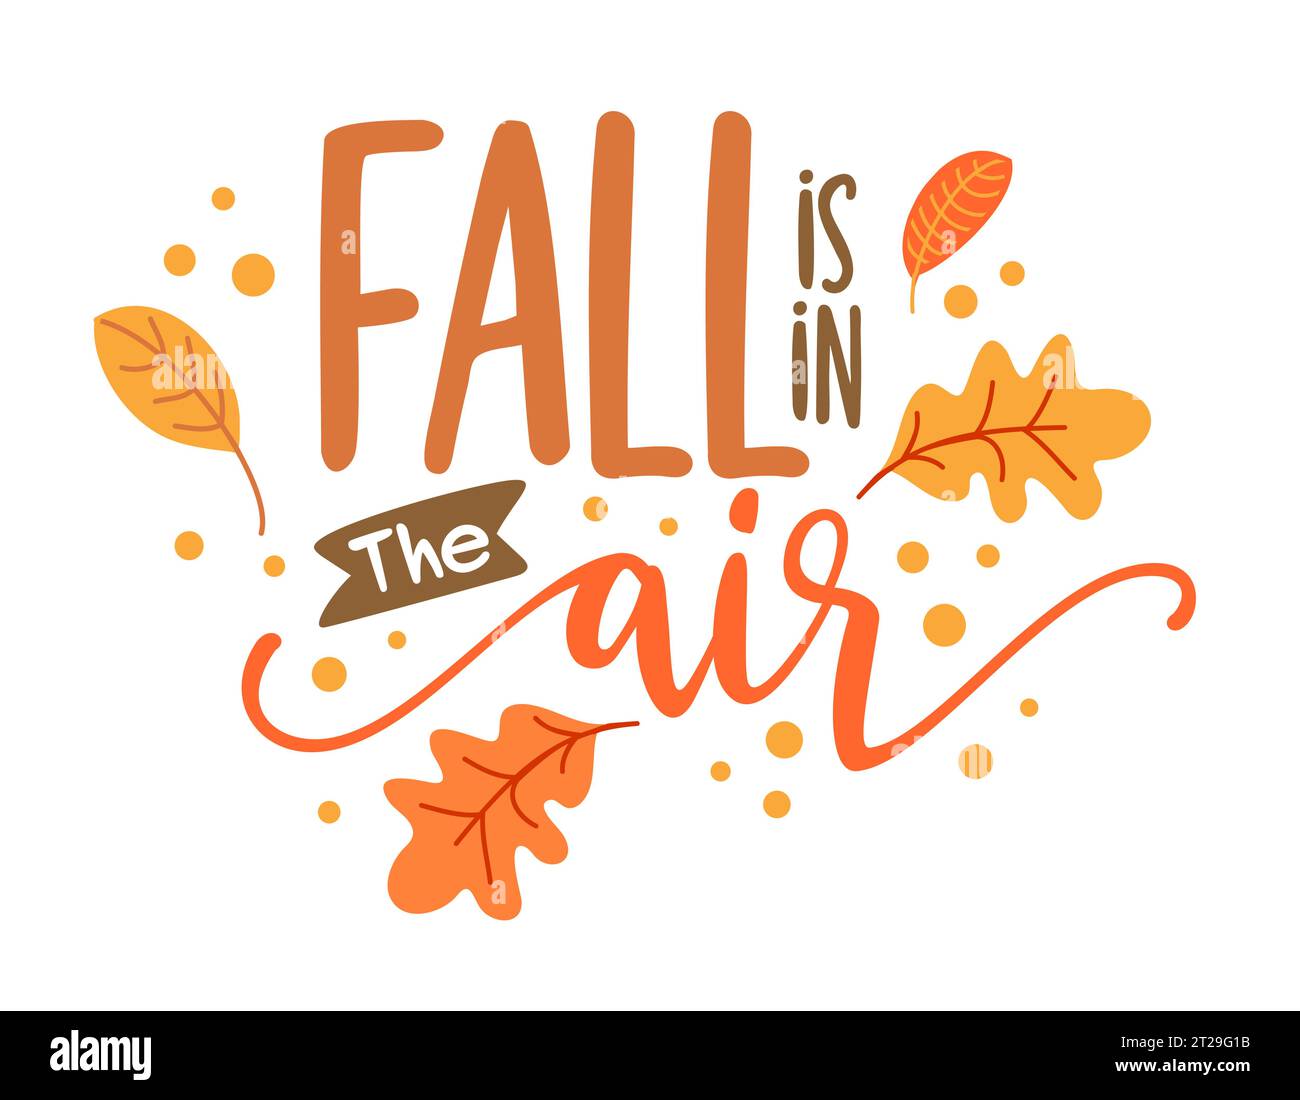 Fall is in the Air - Happy Harvest fall festival design for markets, restaurants, flyers, cards, invitations, stickers, banners. Cute hand drawn hayri Stock Vector